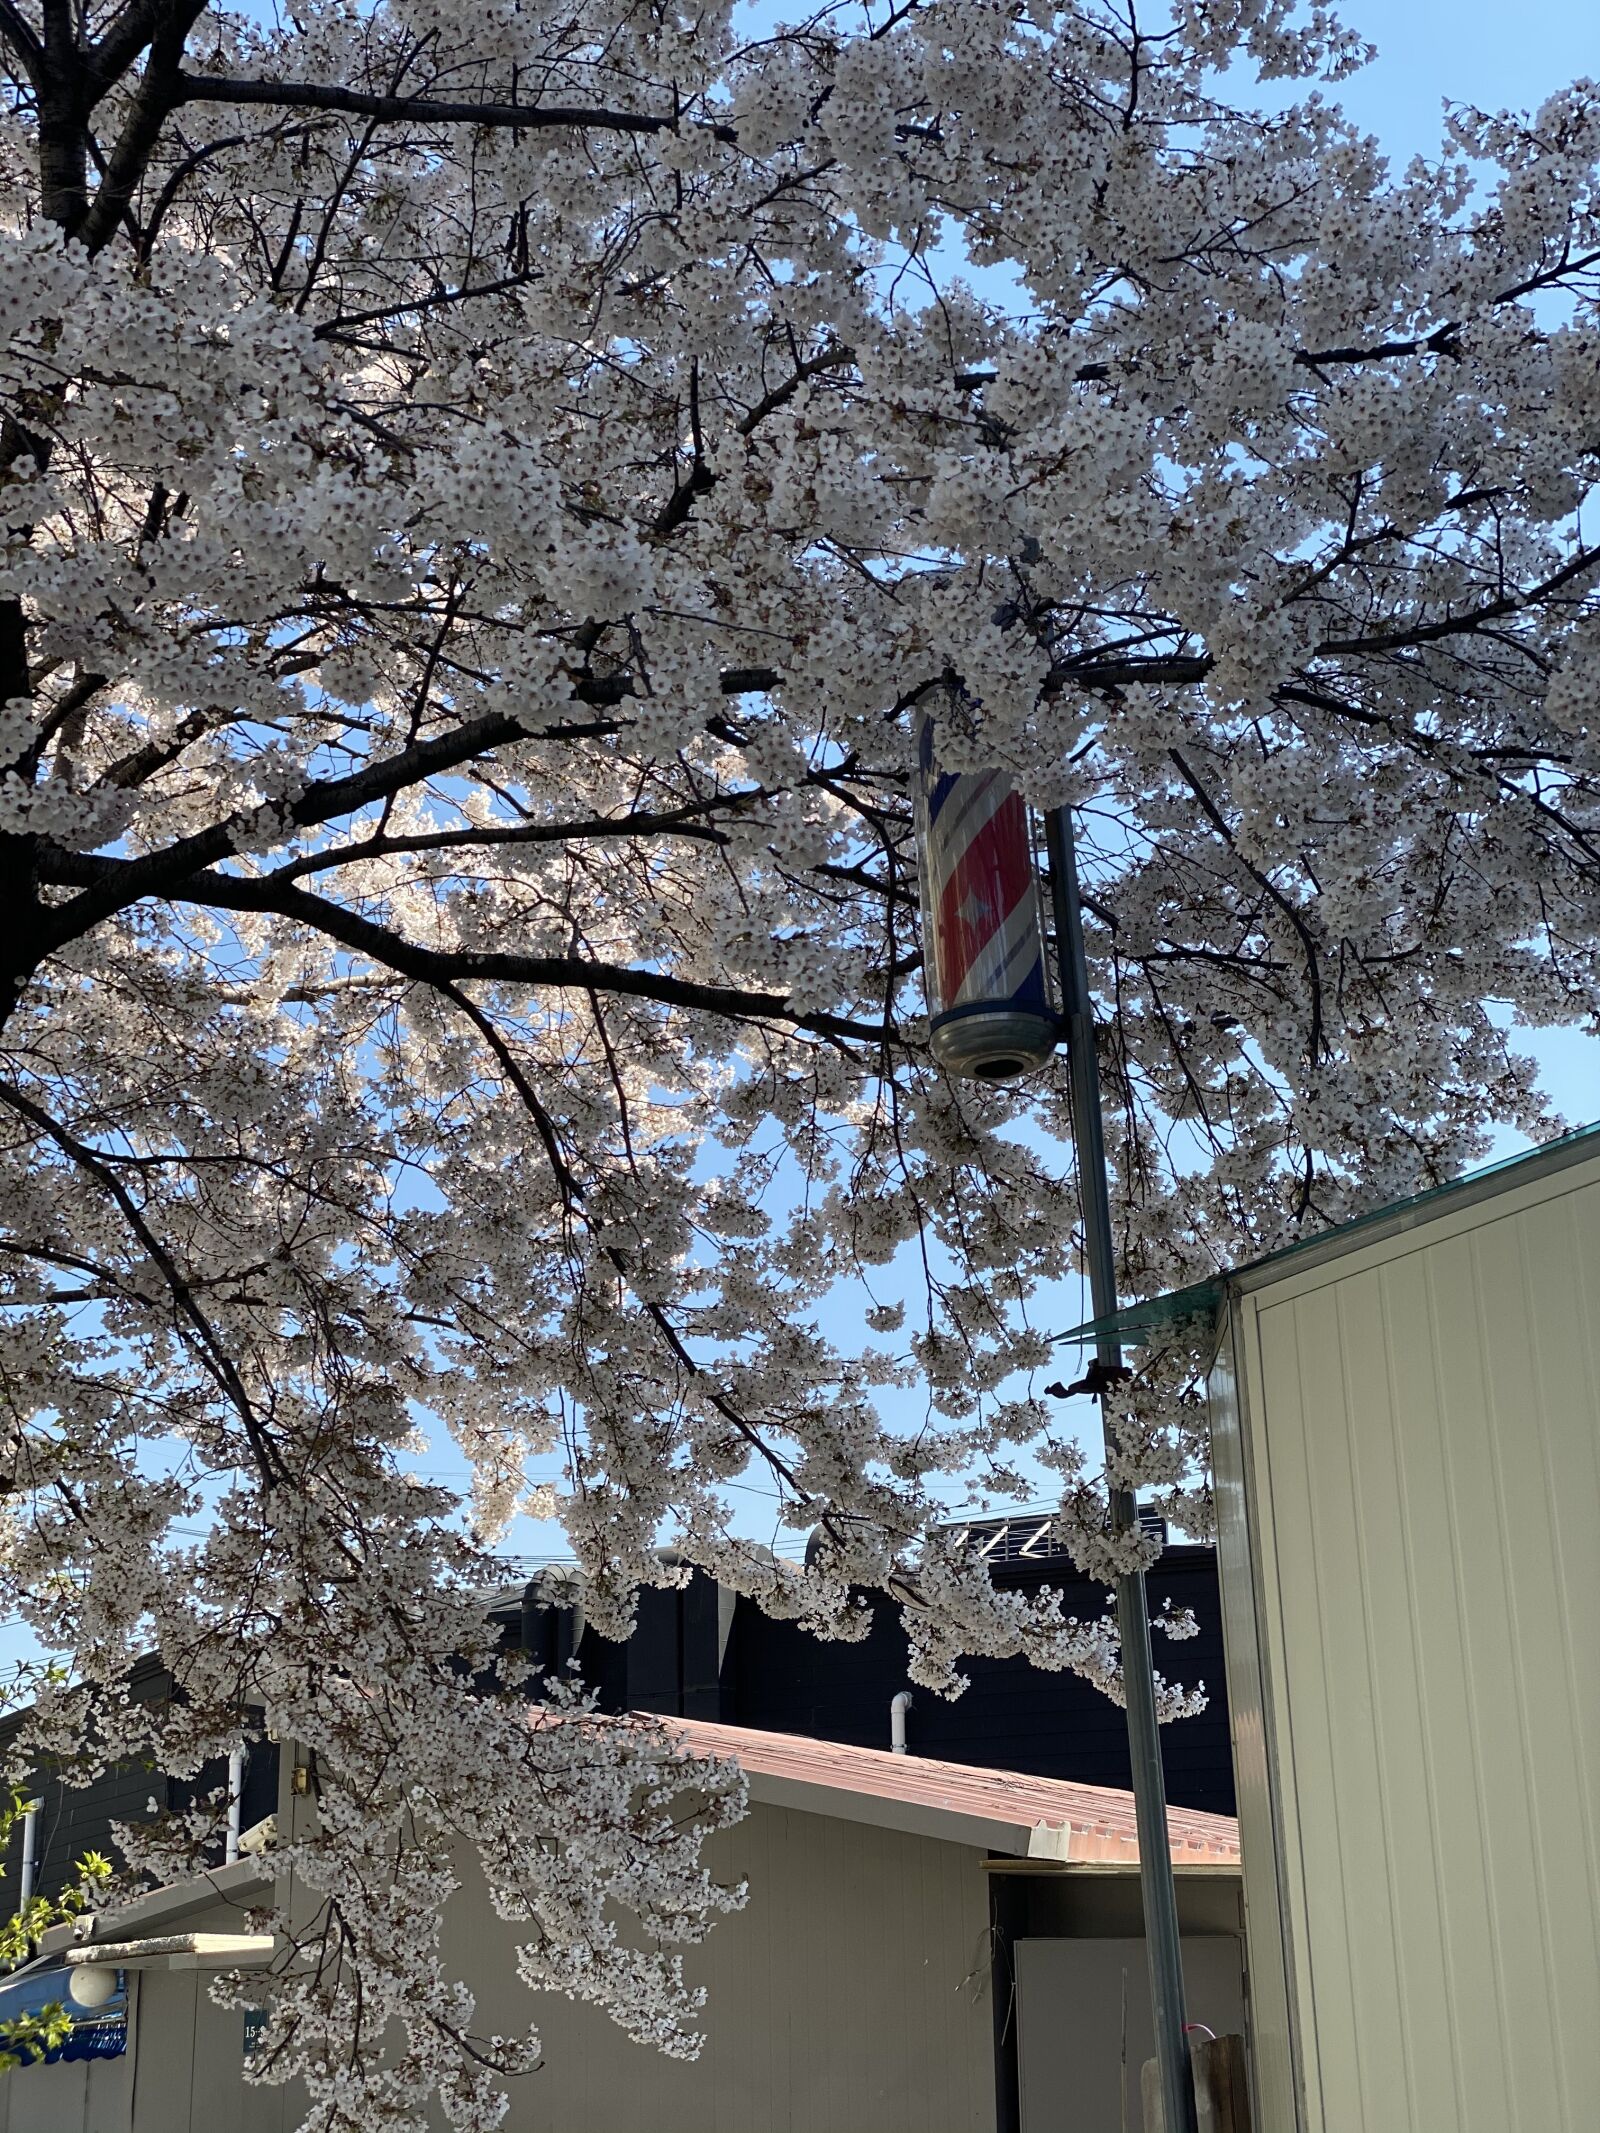 Apple iPhone 11 Pro + iPhone 11 Pro back dual camera 6mm f/2 sample photo. Cherry blossom, barbershop, the photography